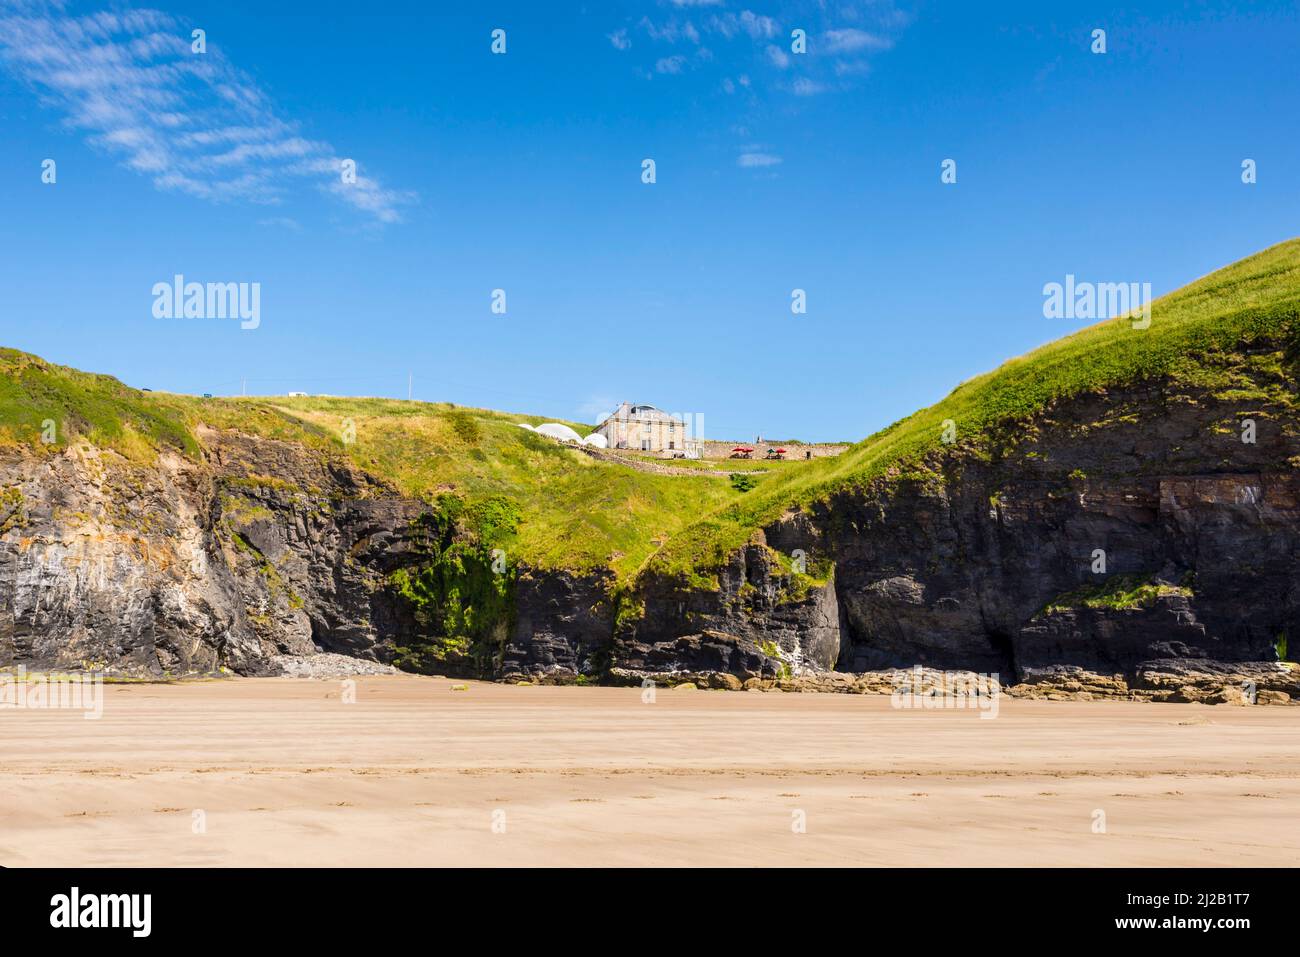 Druidstone Hotel in Pembrokeshire, shown in it's beautiful coastal environment by the clifftop overlooking Druidstone beach, on a sunny afternoon. Stock Photo